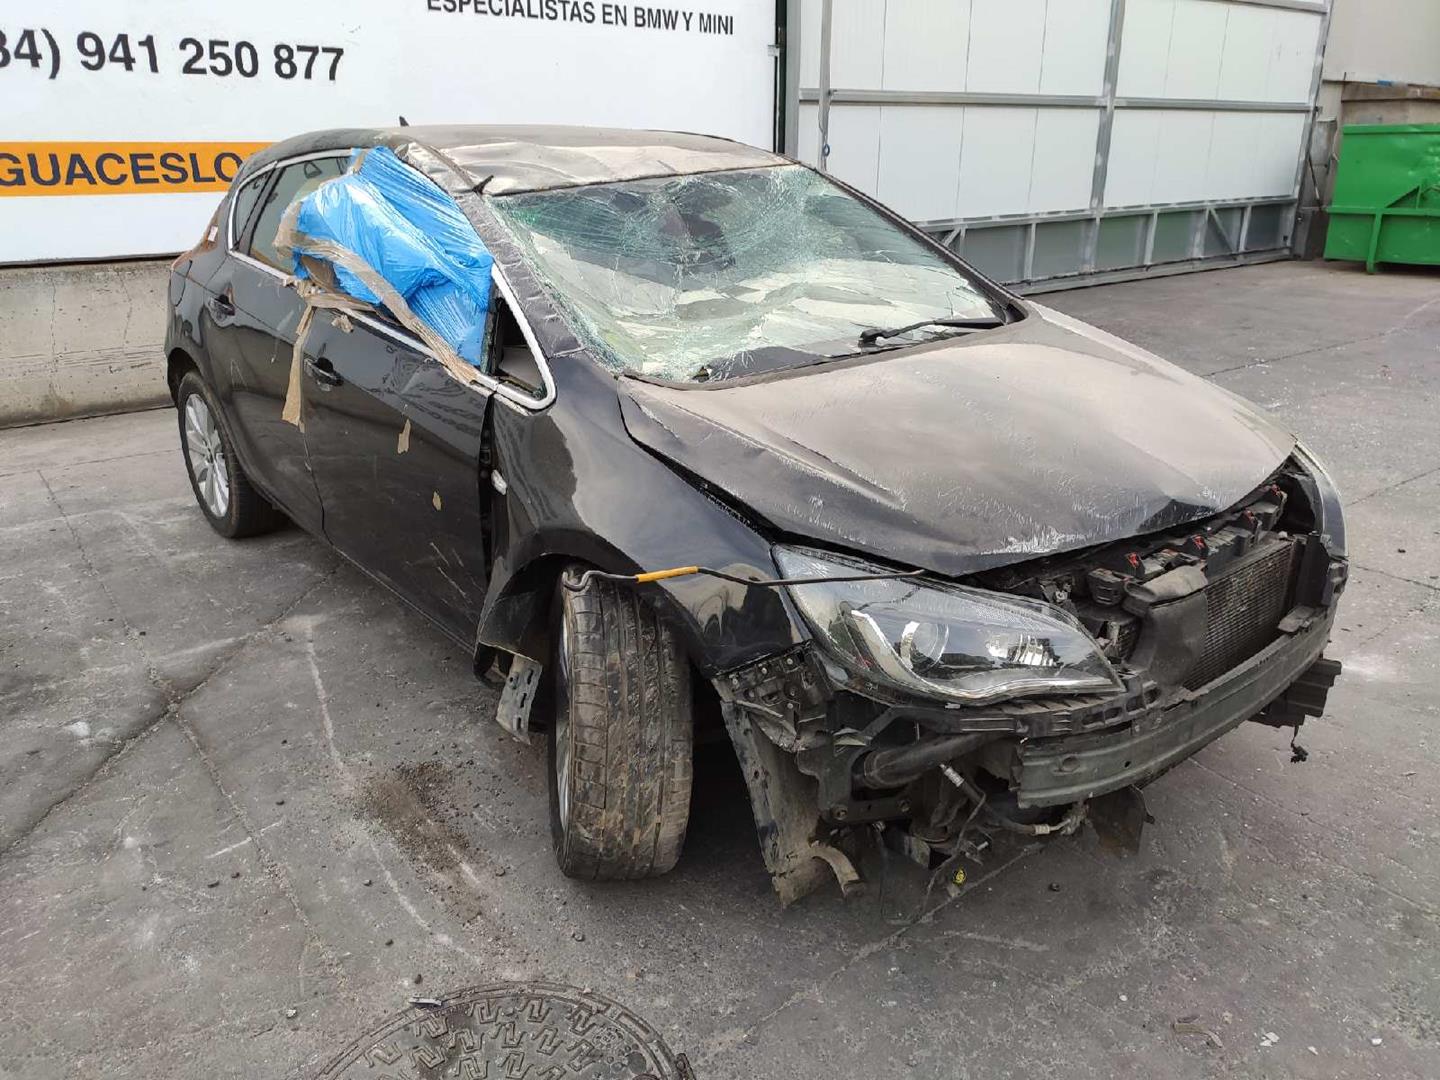 OPEL Astra J (2009-2020) Other Interior Parts 22774316, 316627975 24186501